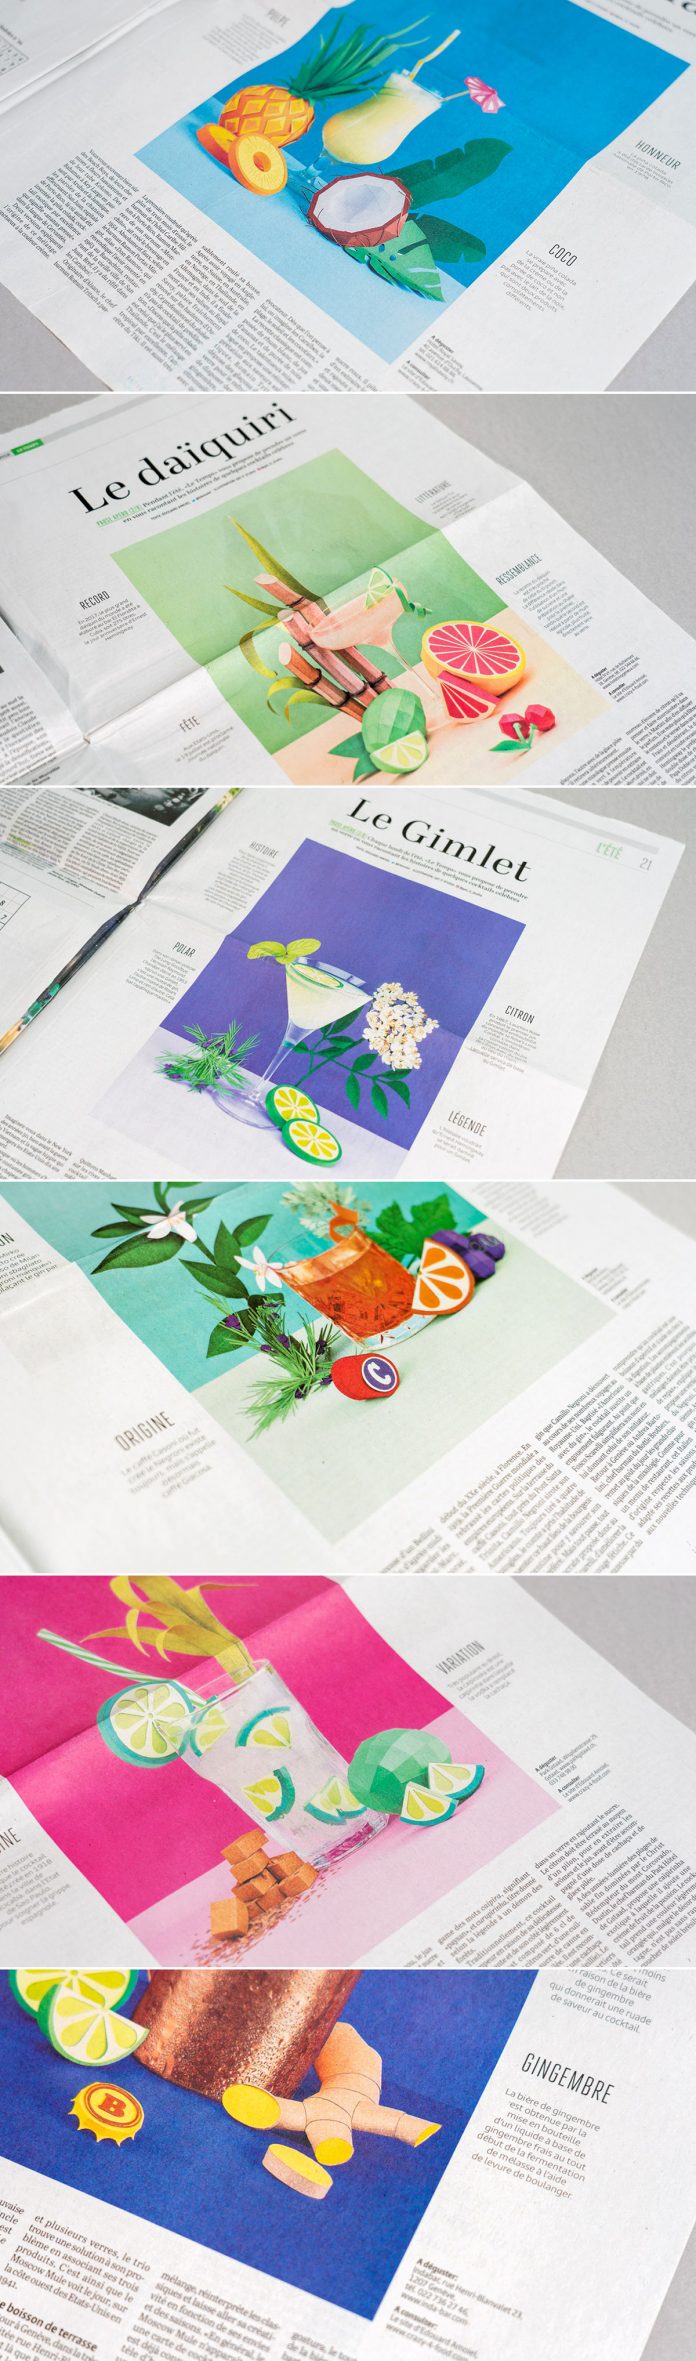 8 editorial paper art illustrations created by Get it Studio for Swiss newspaper “Le Temps” about summer cocktails.